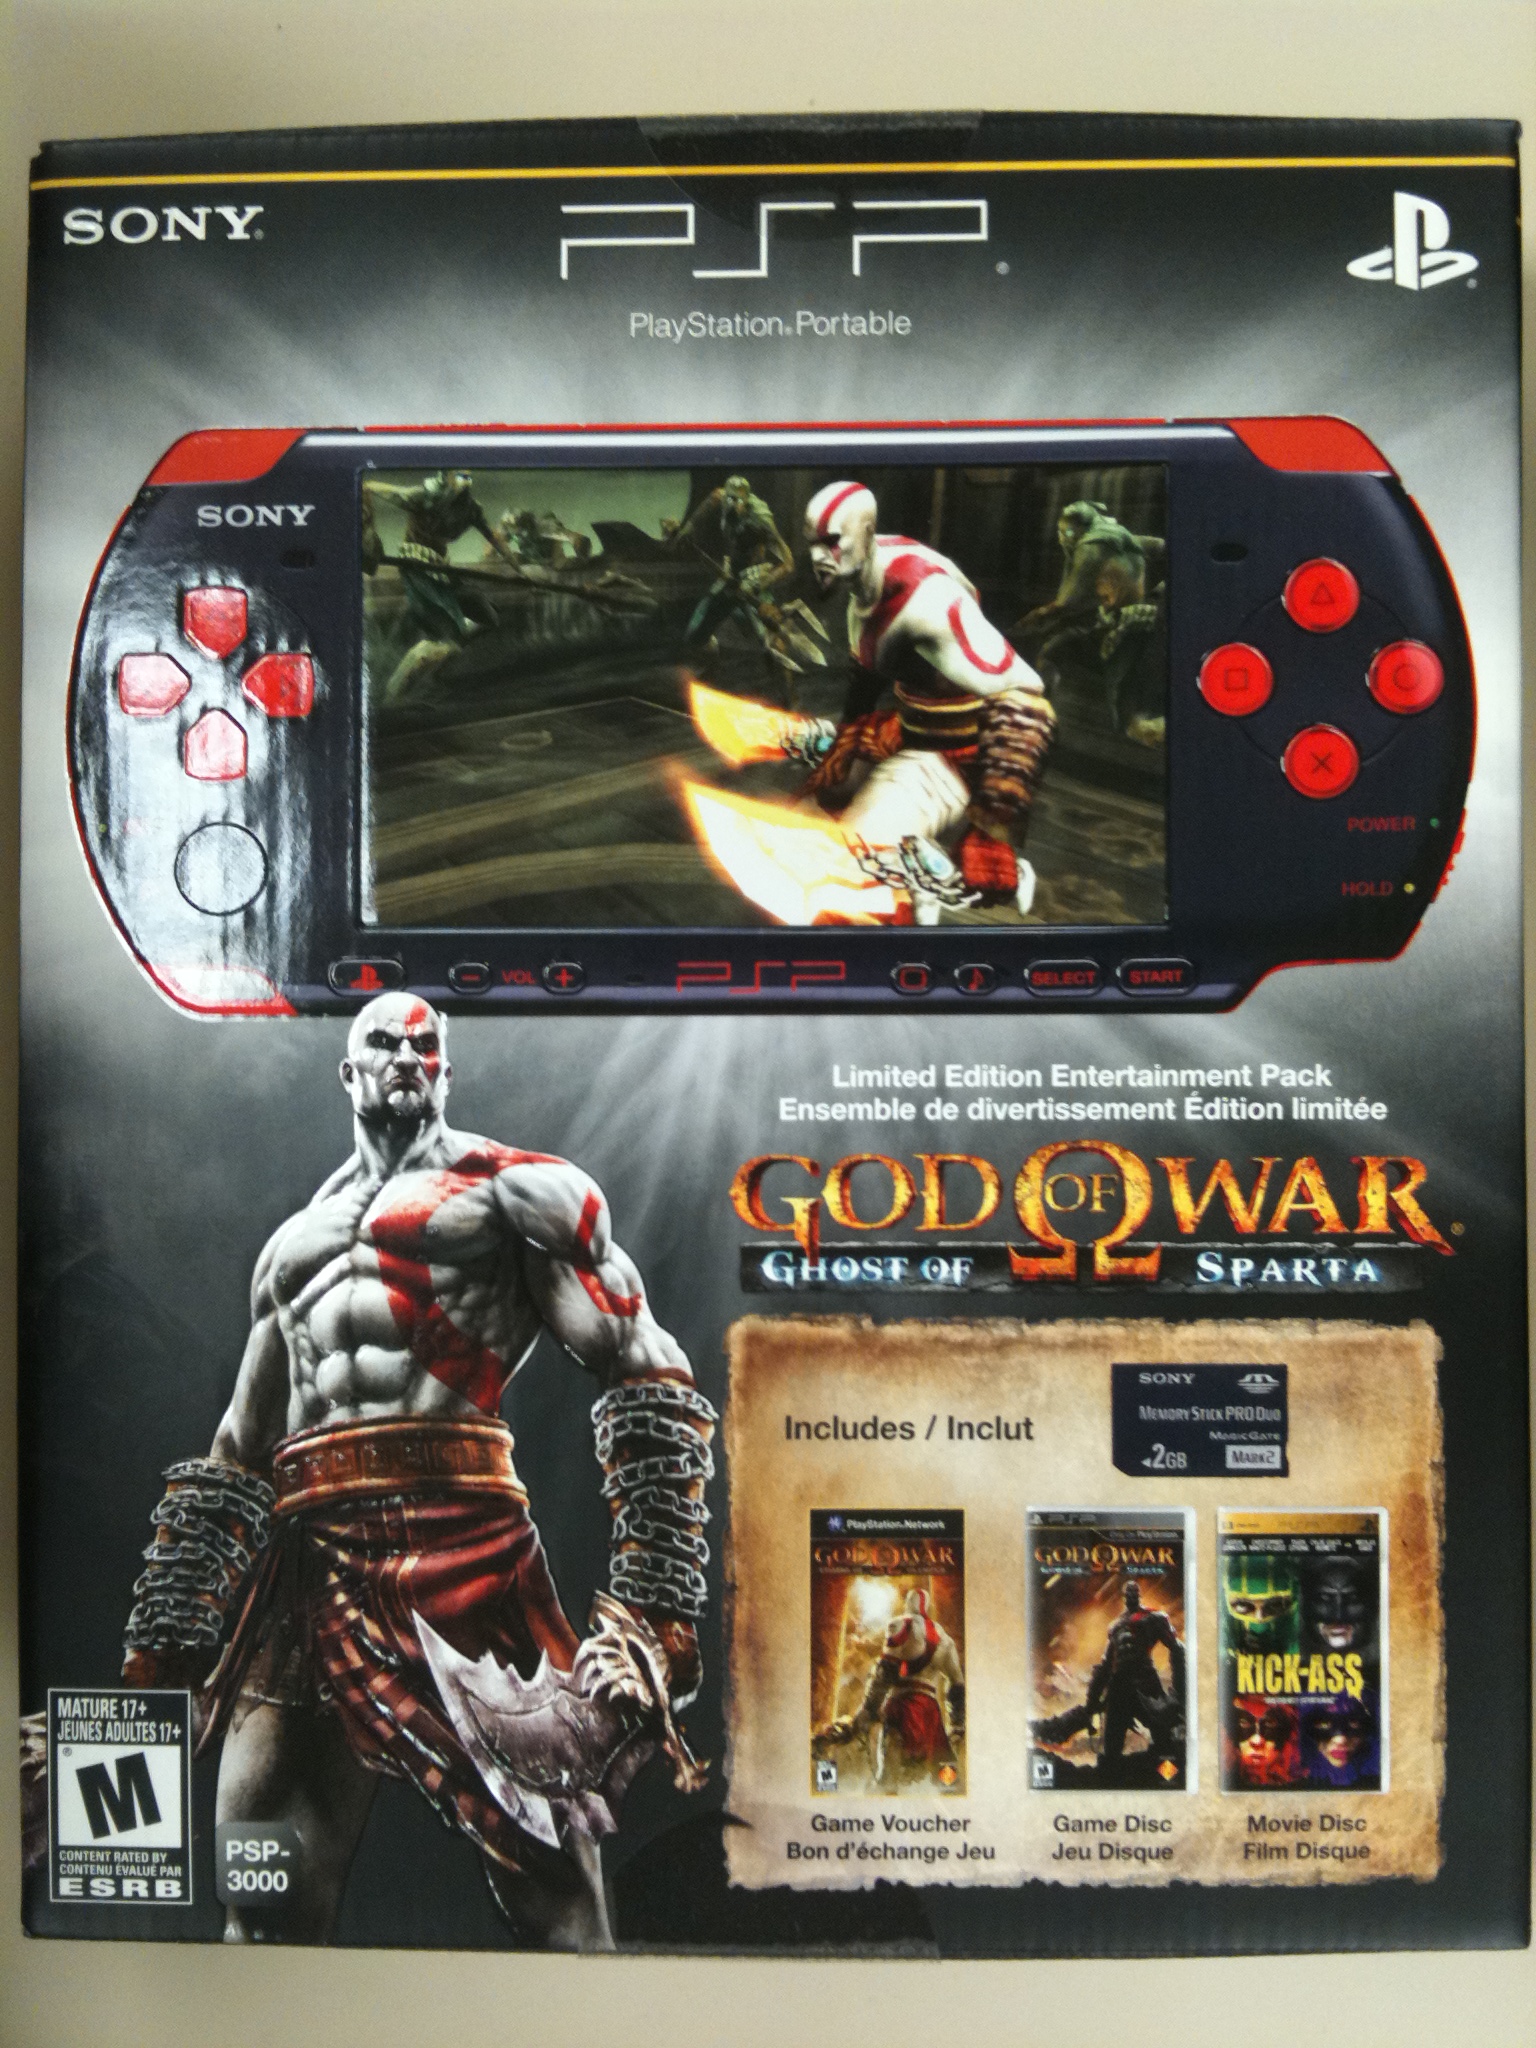 God Of War: Ghost Of Sparta Announced For PSP, First Screenshots Released